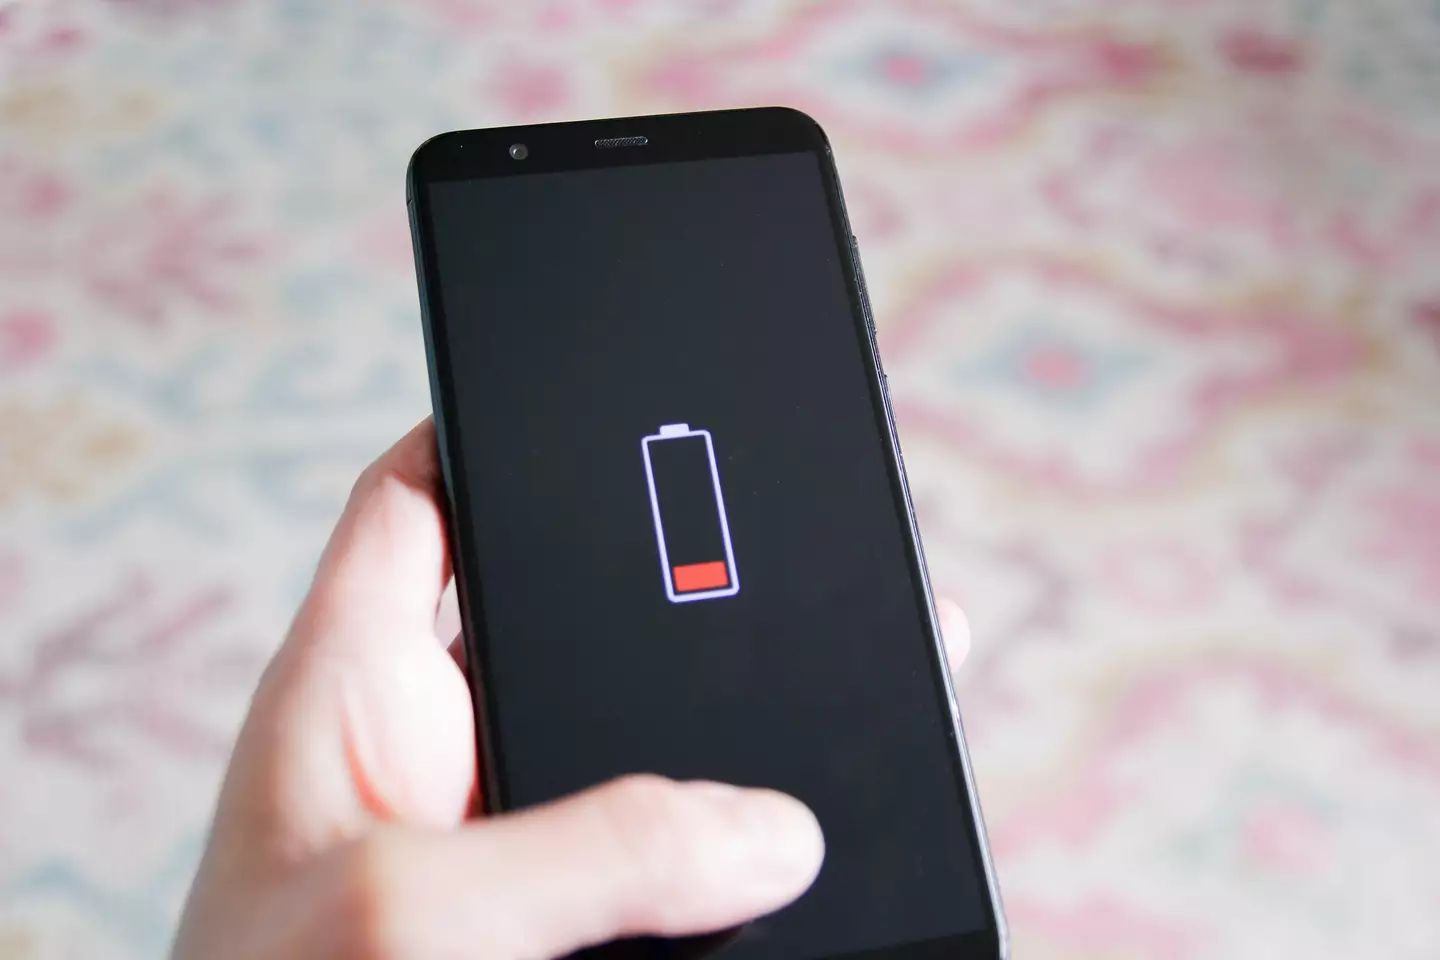 The latest issue smartphone users are having with Apple surrounds battery health.